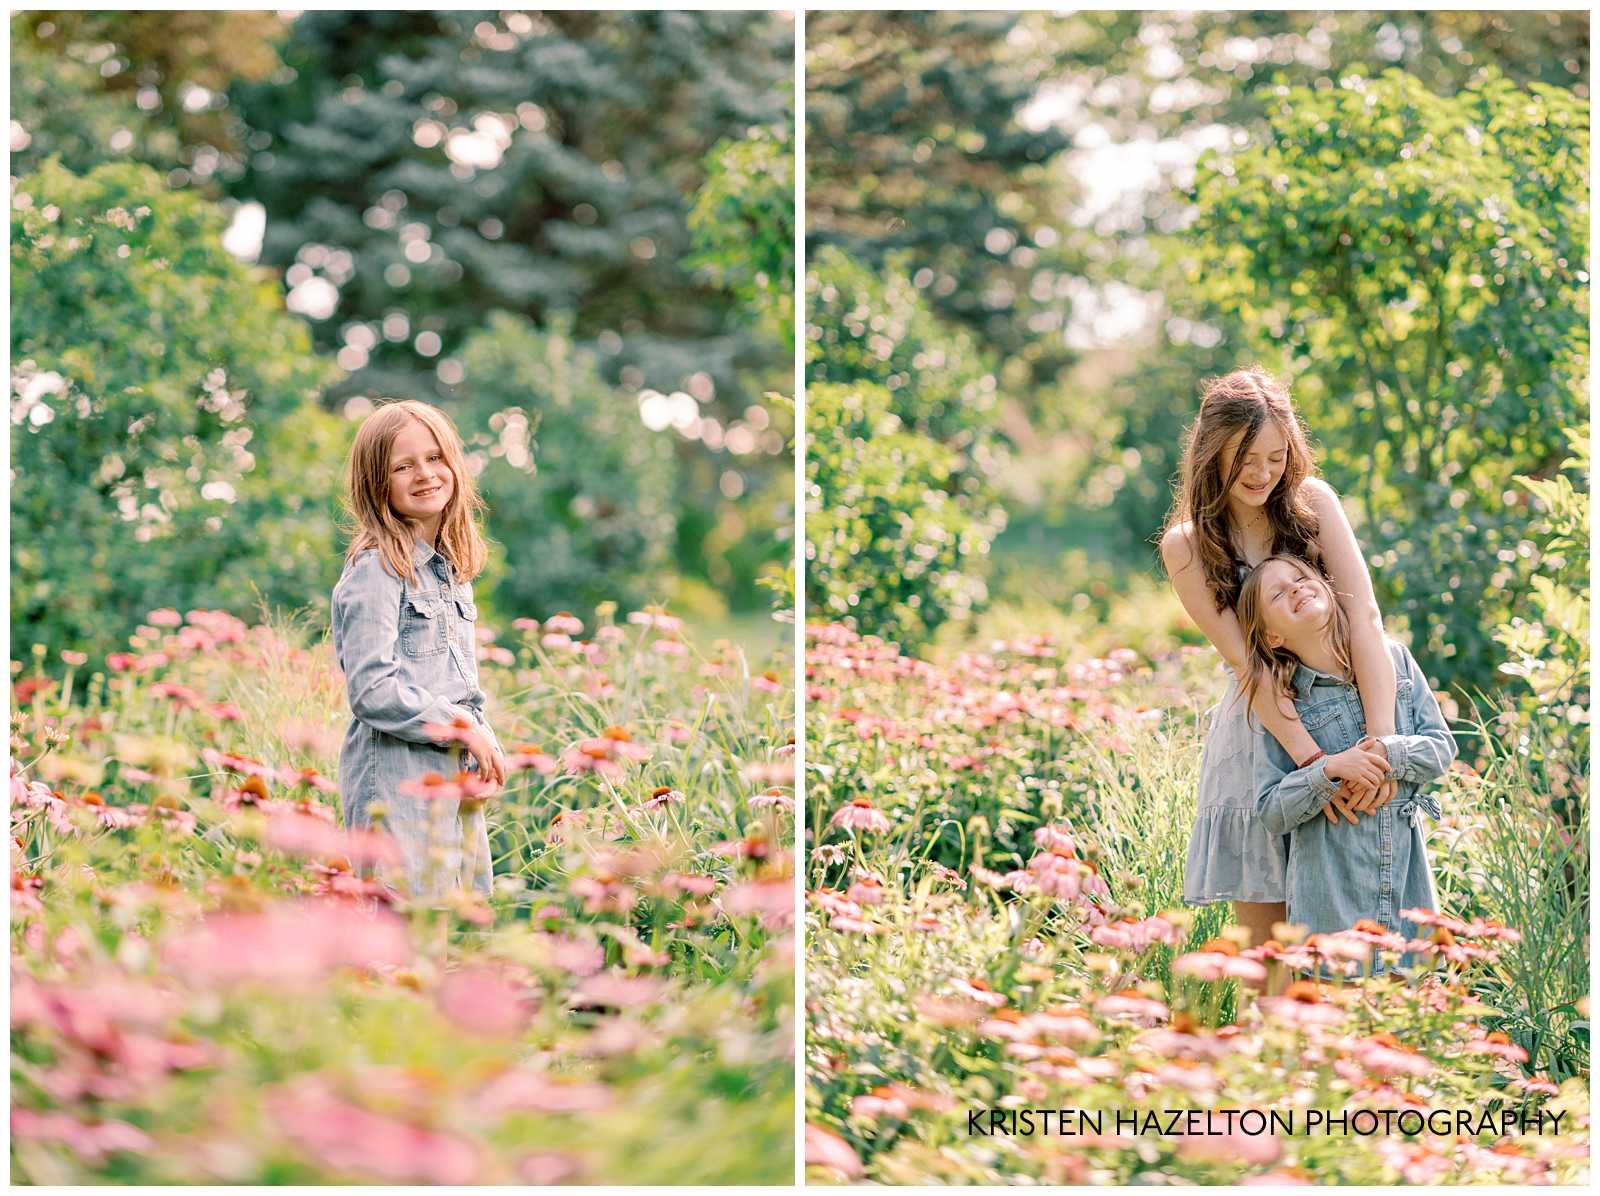 Family photos of sisters in a garden of pink coneflowers